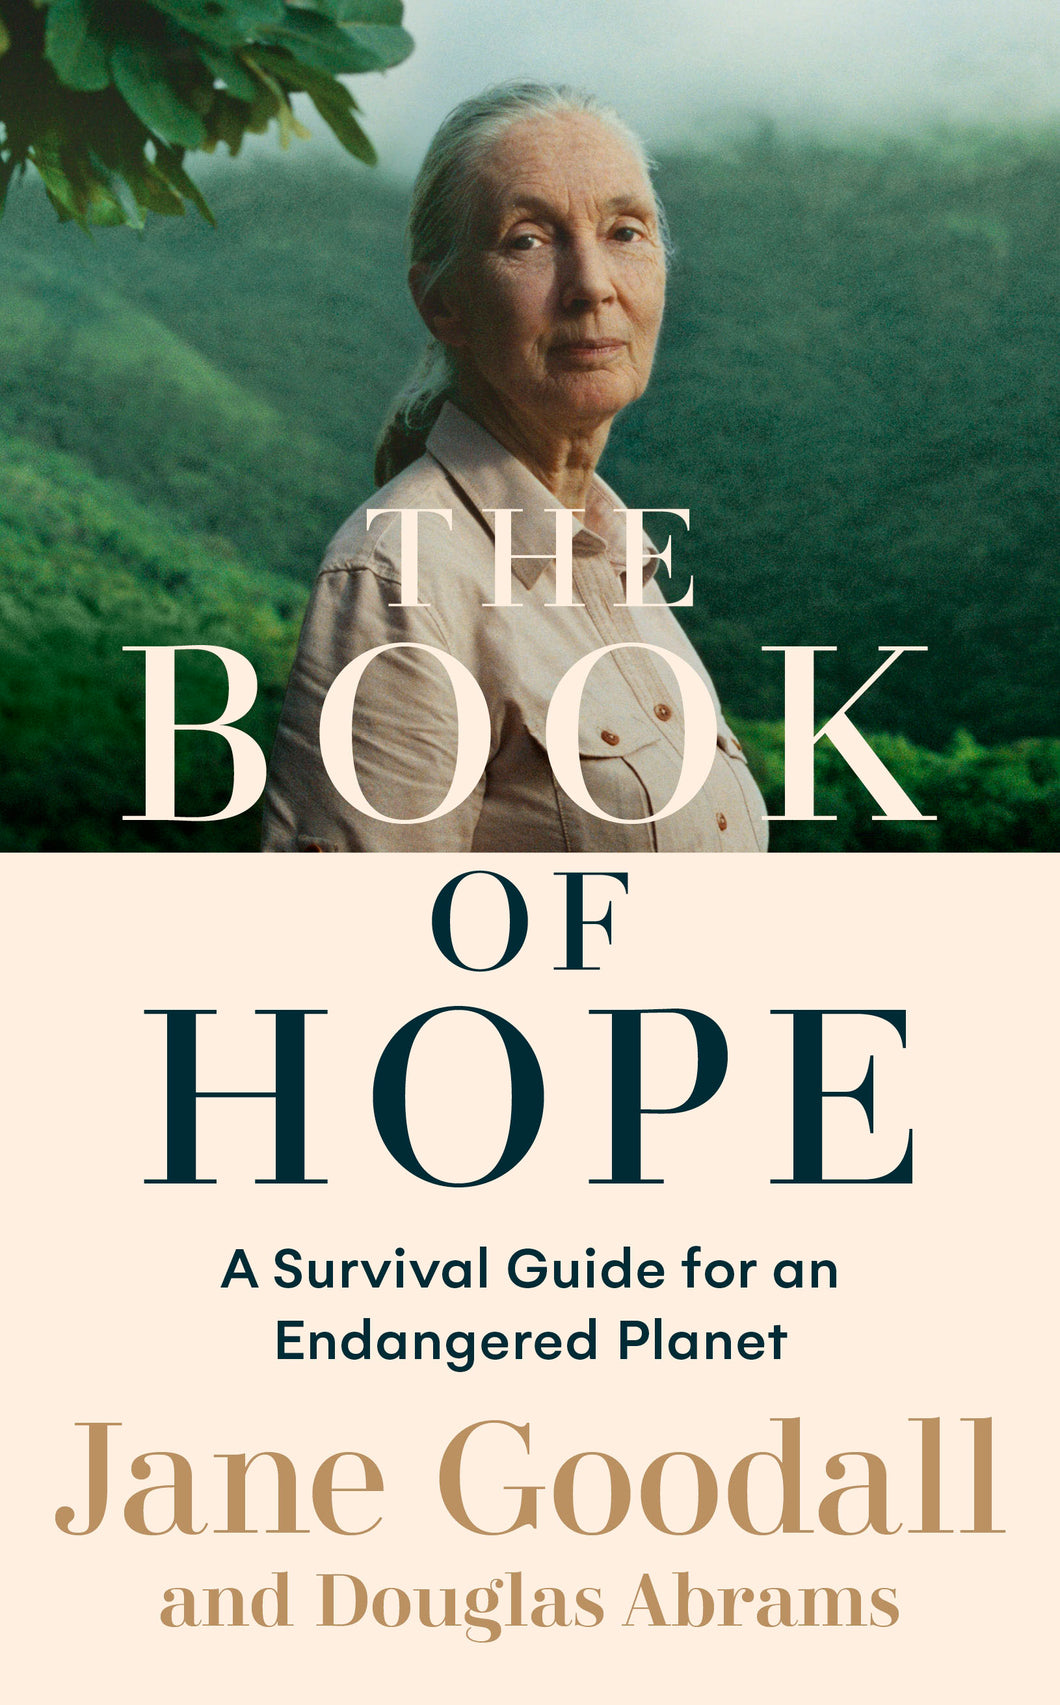 Book cover is split into two horizontally. The top half has a colour photograph of Jane Goodall (a white woman) in a beige button-up shirt standing in front of a valley of trees. The bottom half is off white. Across both sections, the title reads 'The book of hope, a survival guide for an endangered planet, Jane Goodall and Douglas Abrams.' 